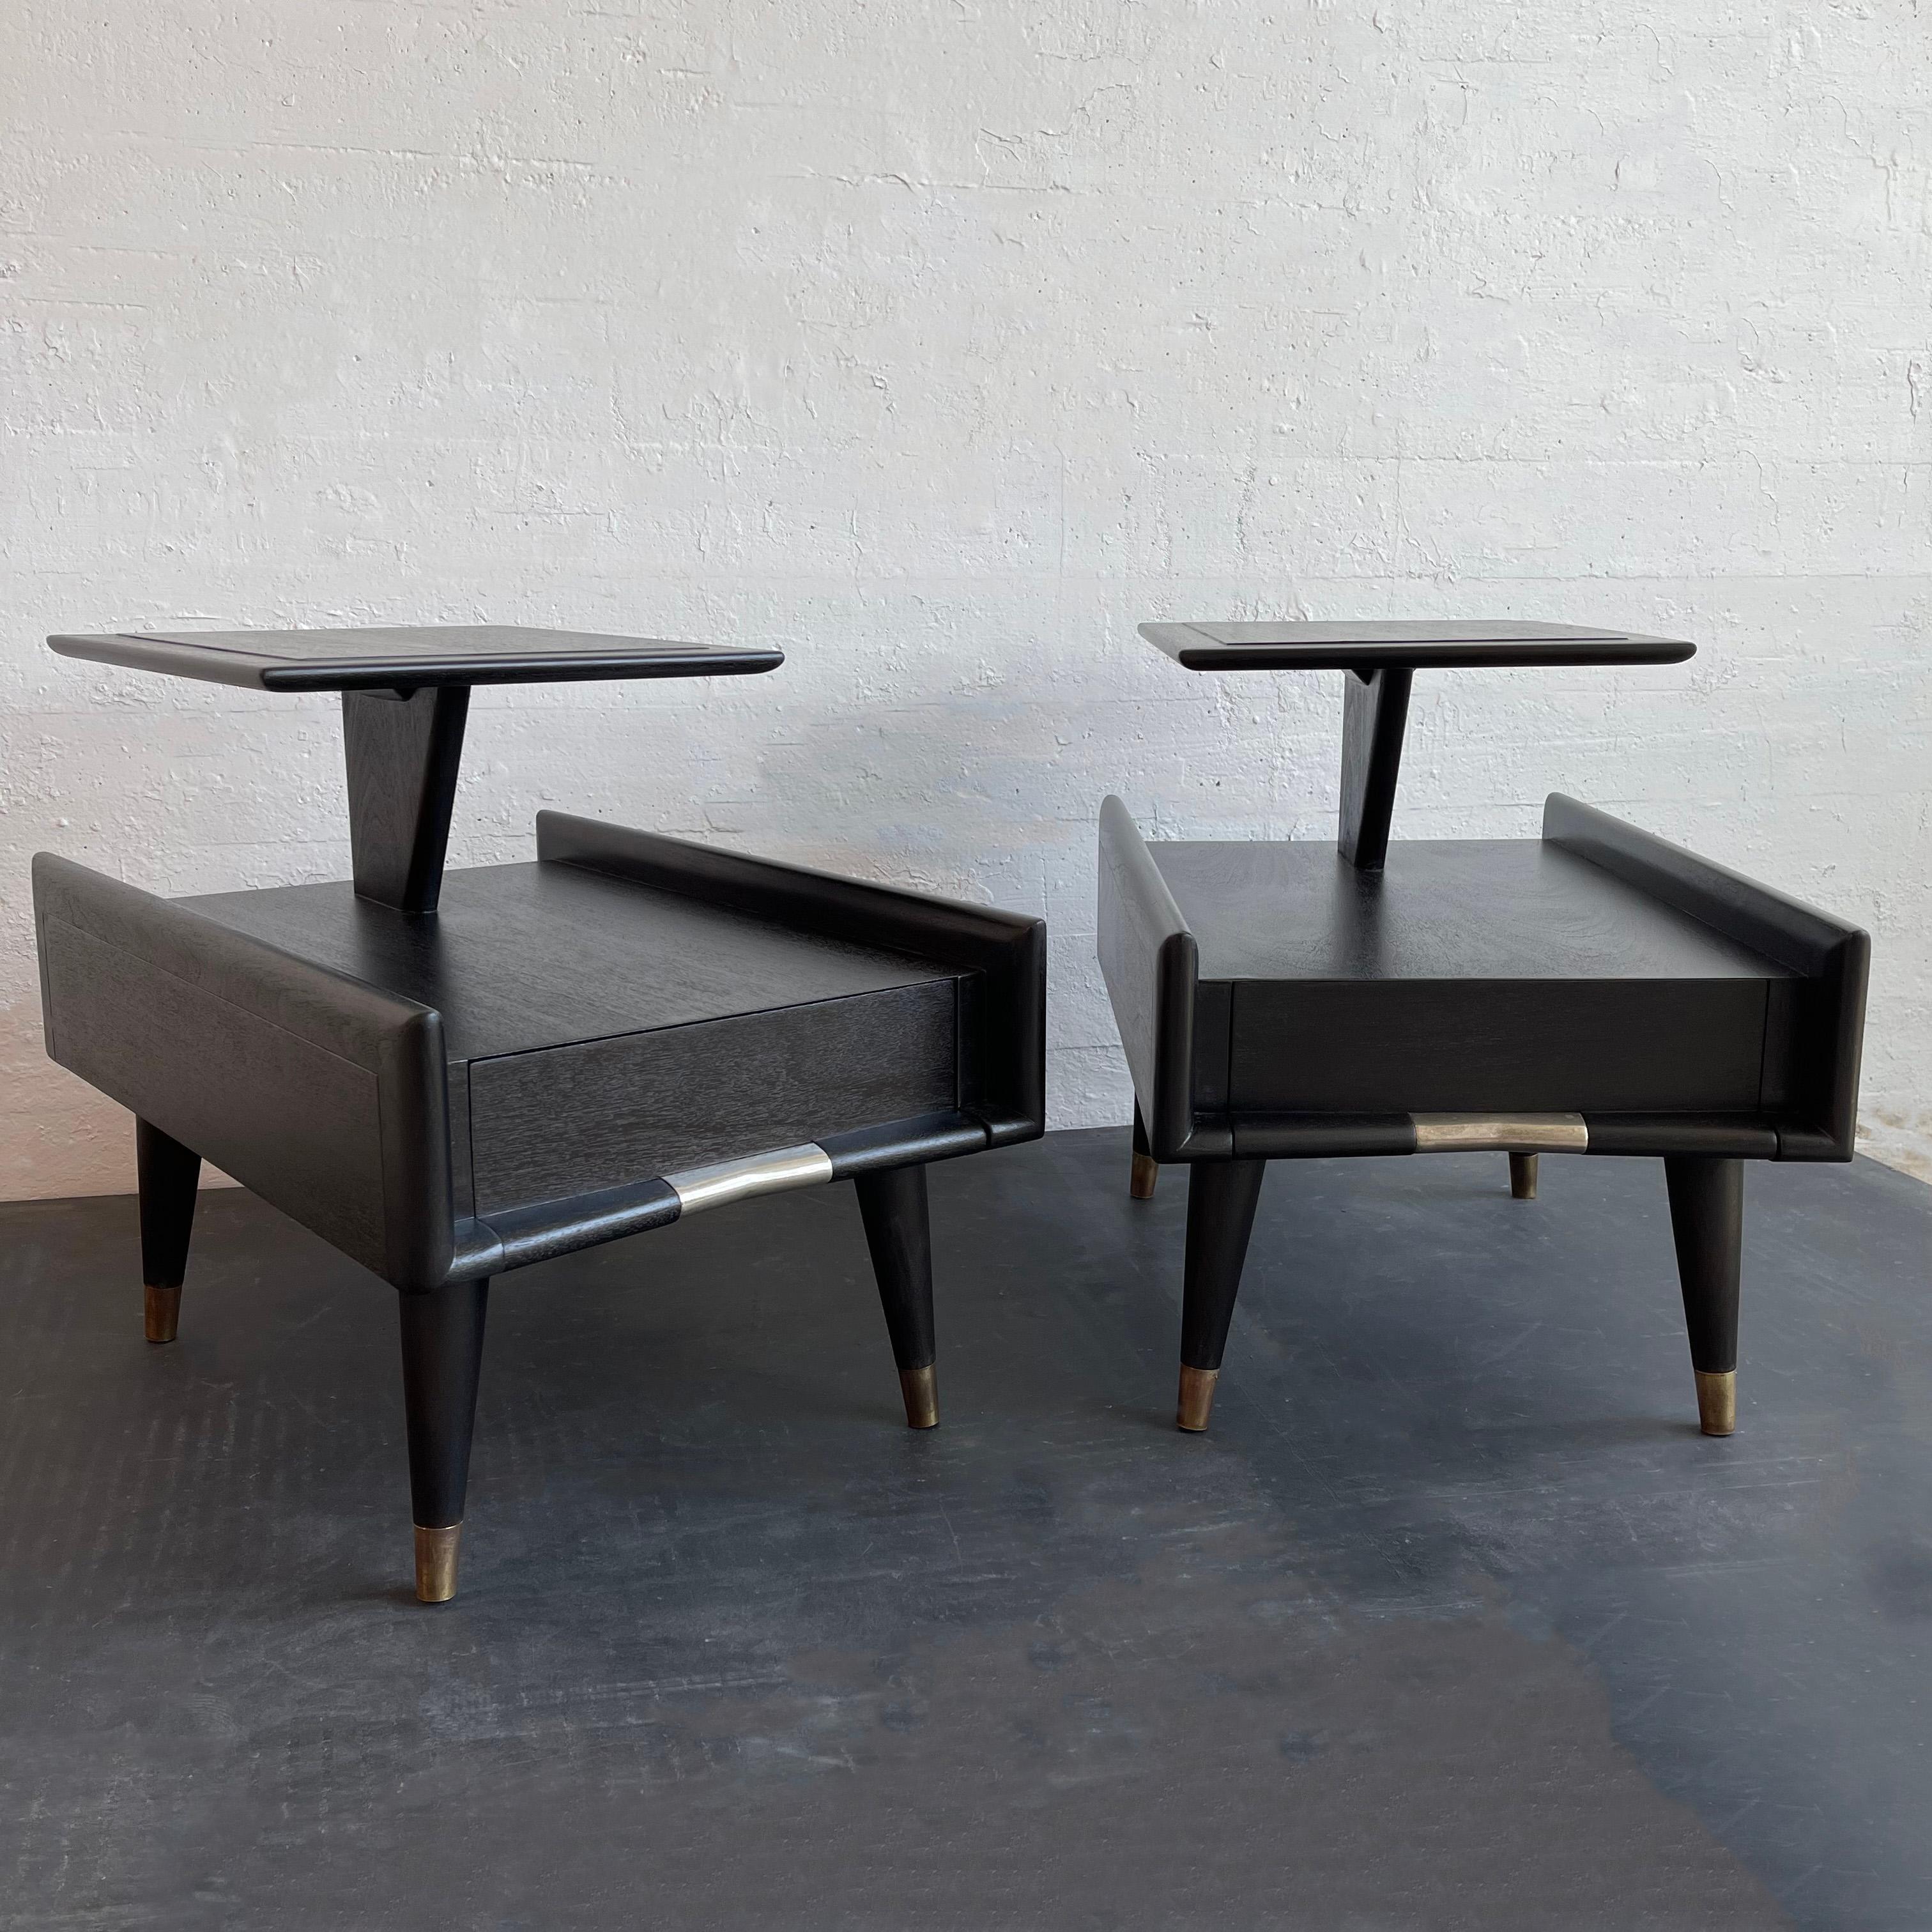 Striking pair of atomic, mid-century modern, ebonized mahogany, stepped end tables or nightstands produced by Gordon’s Inc. Furniture company. The tiered tables feature tapered legs with brass sabots and aluminum drawer accents. The lower tier